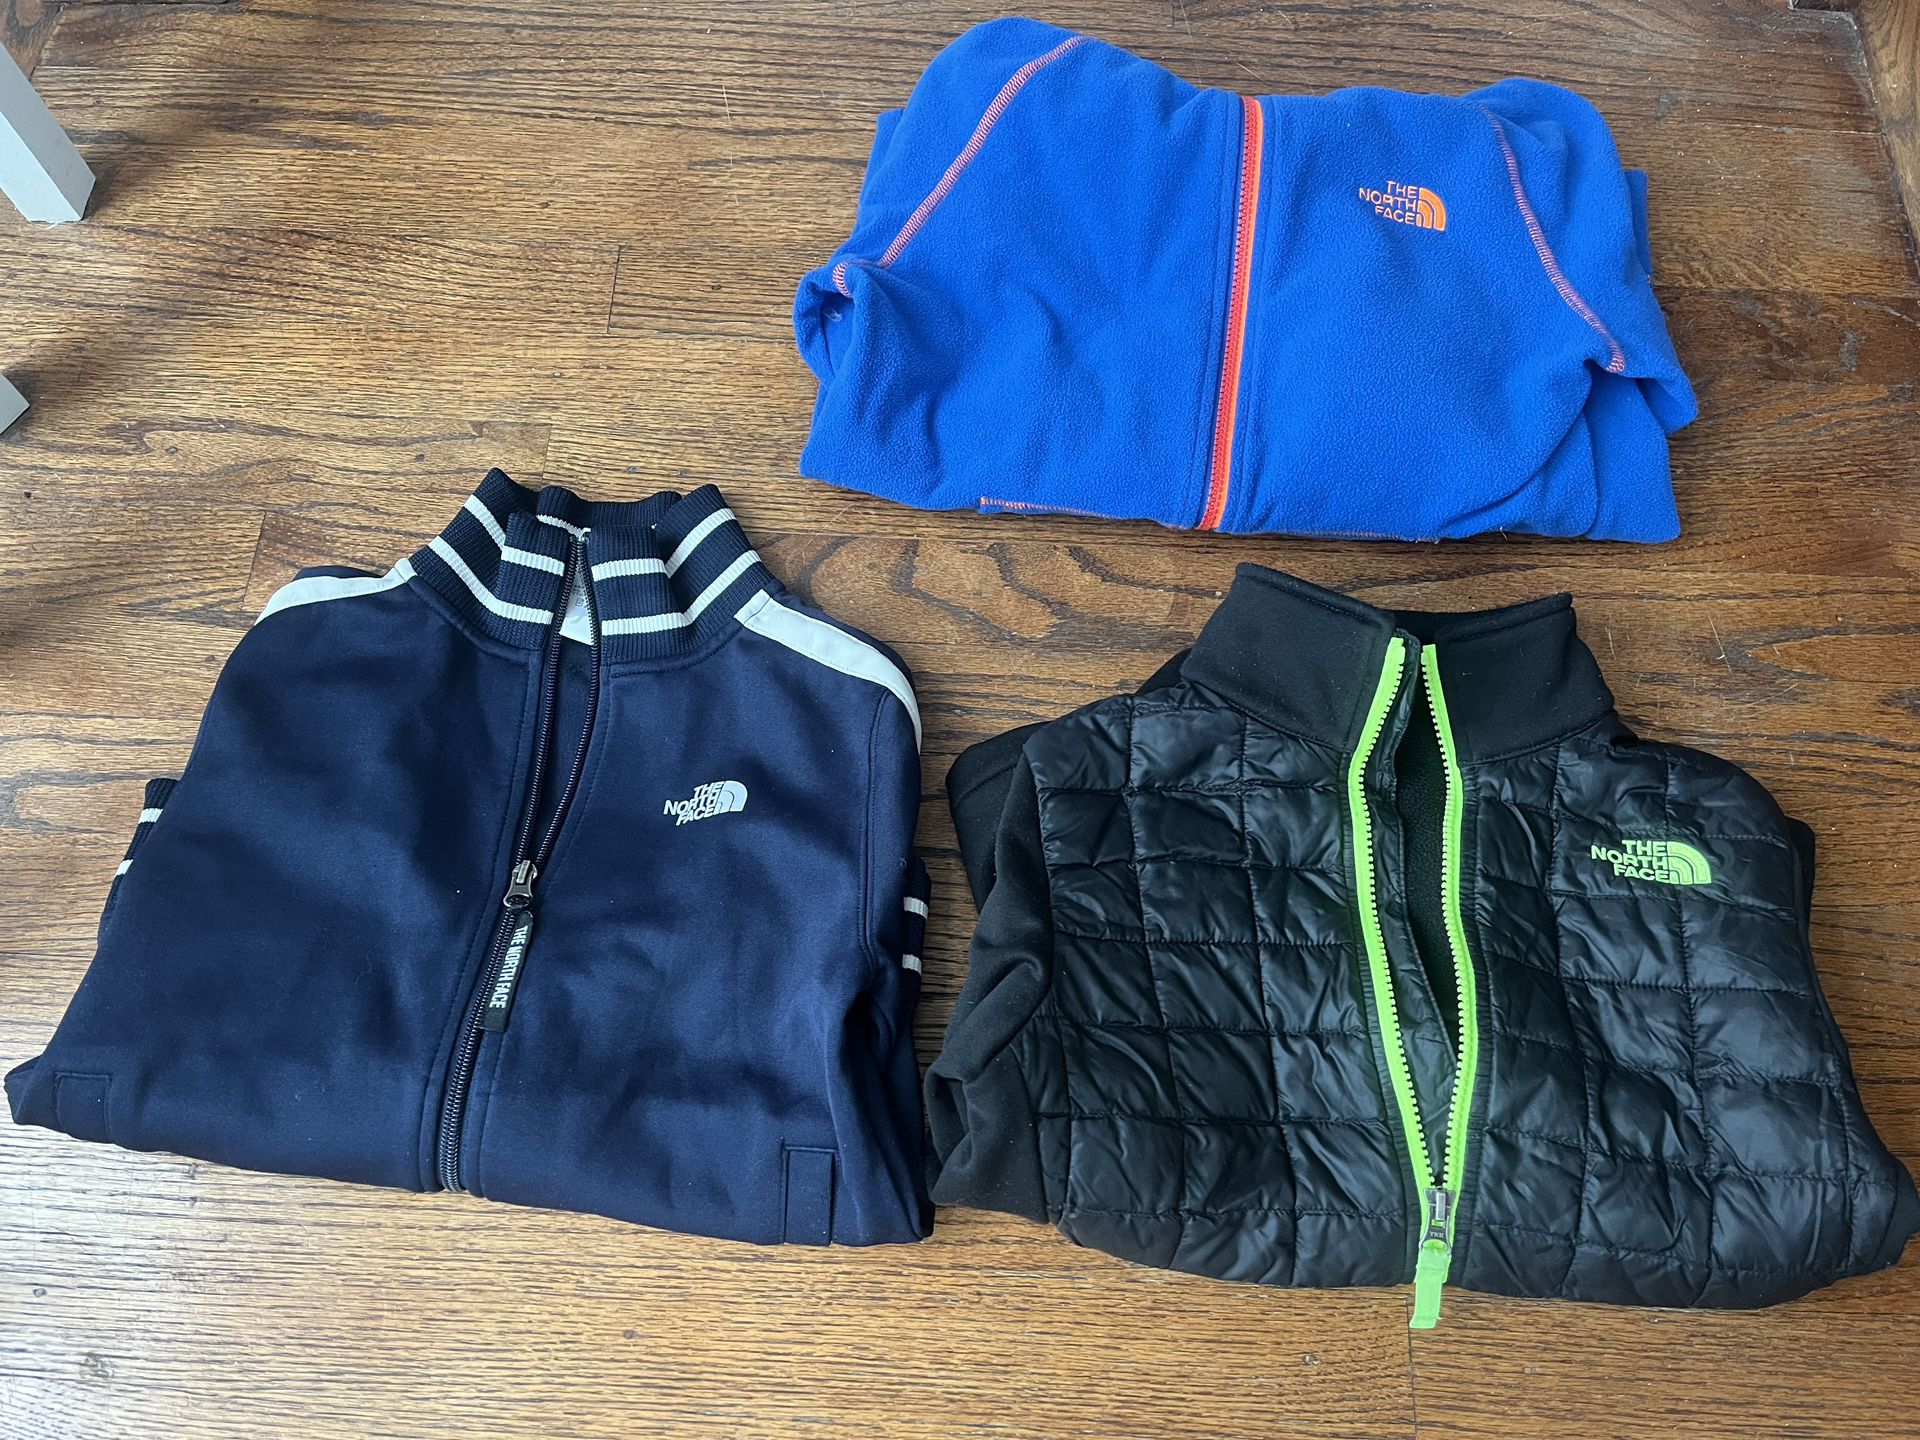 Boys North Face https://offerup.com/redirect/?o=SmFja2V0cy5CbHVlL29yYW5nZQ== Size Lg , Two Others Small 7/8. ($12 For Navy With Striped Collar, $15 Fo